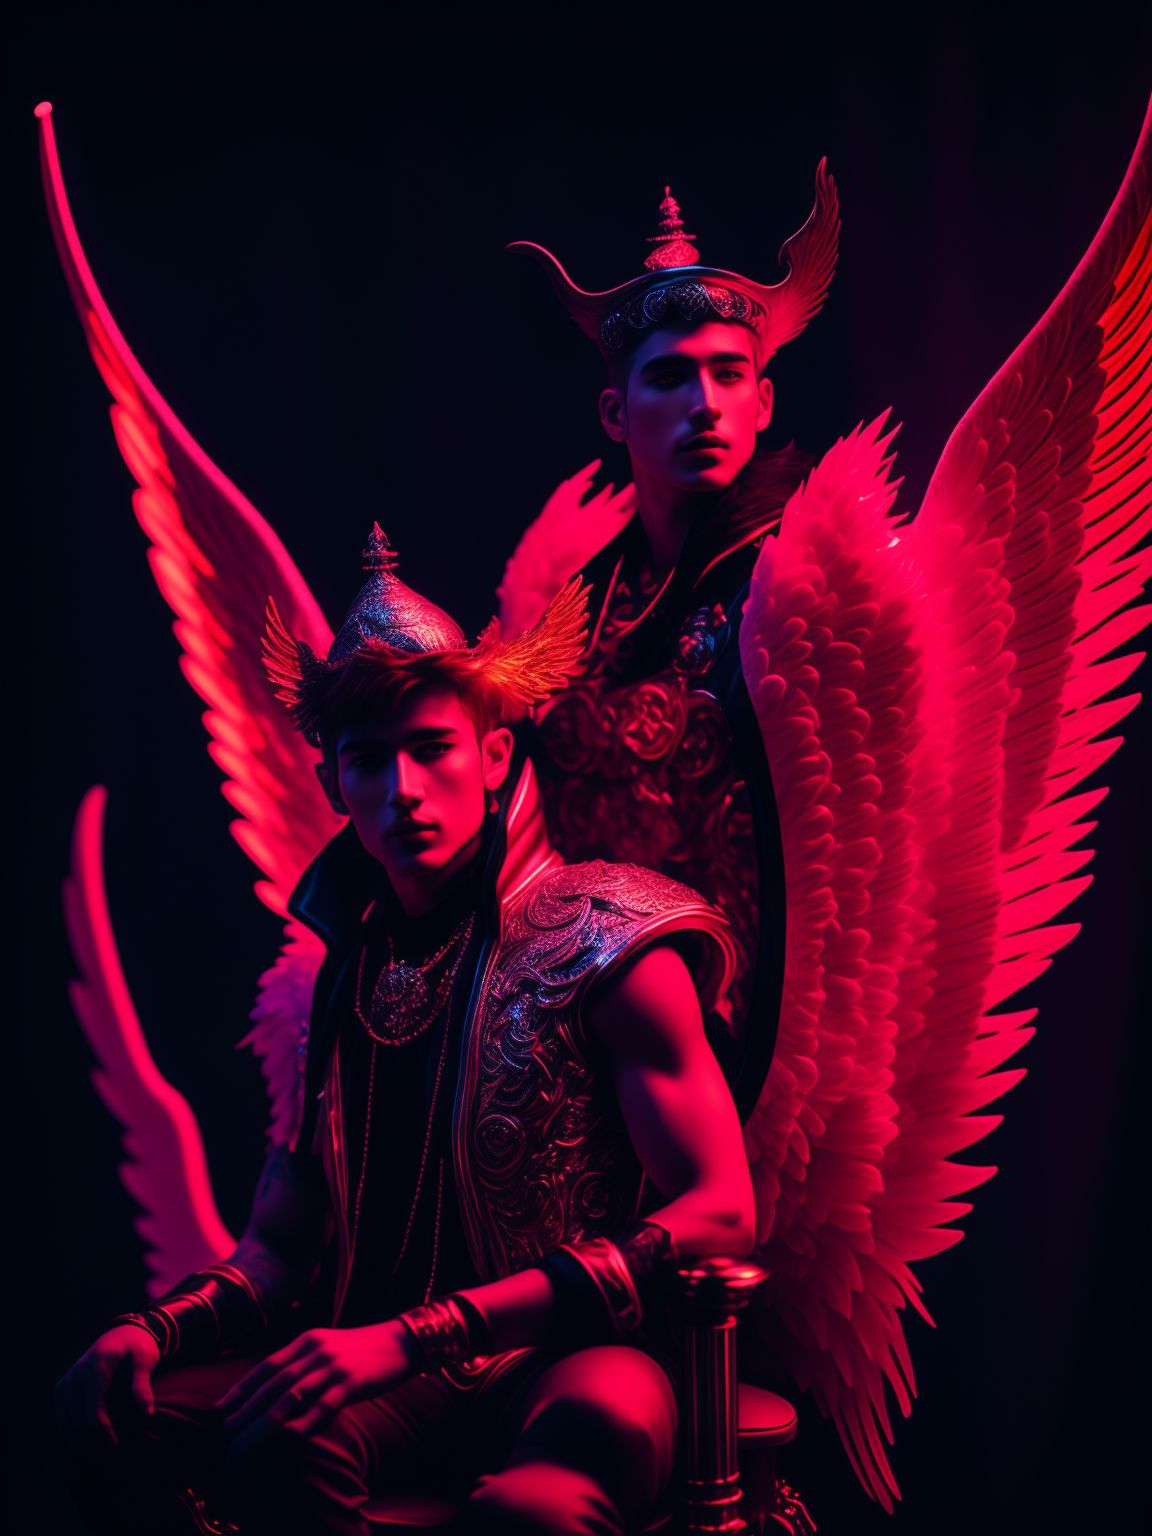 narrow-goat215: Male angel with red hair with jester hat, wings behind  back, sat on a throne, neon lighting